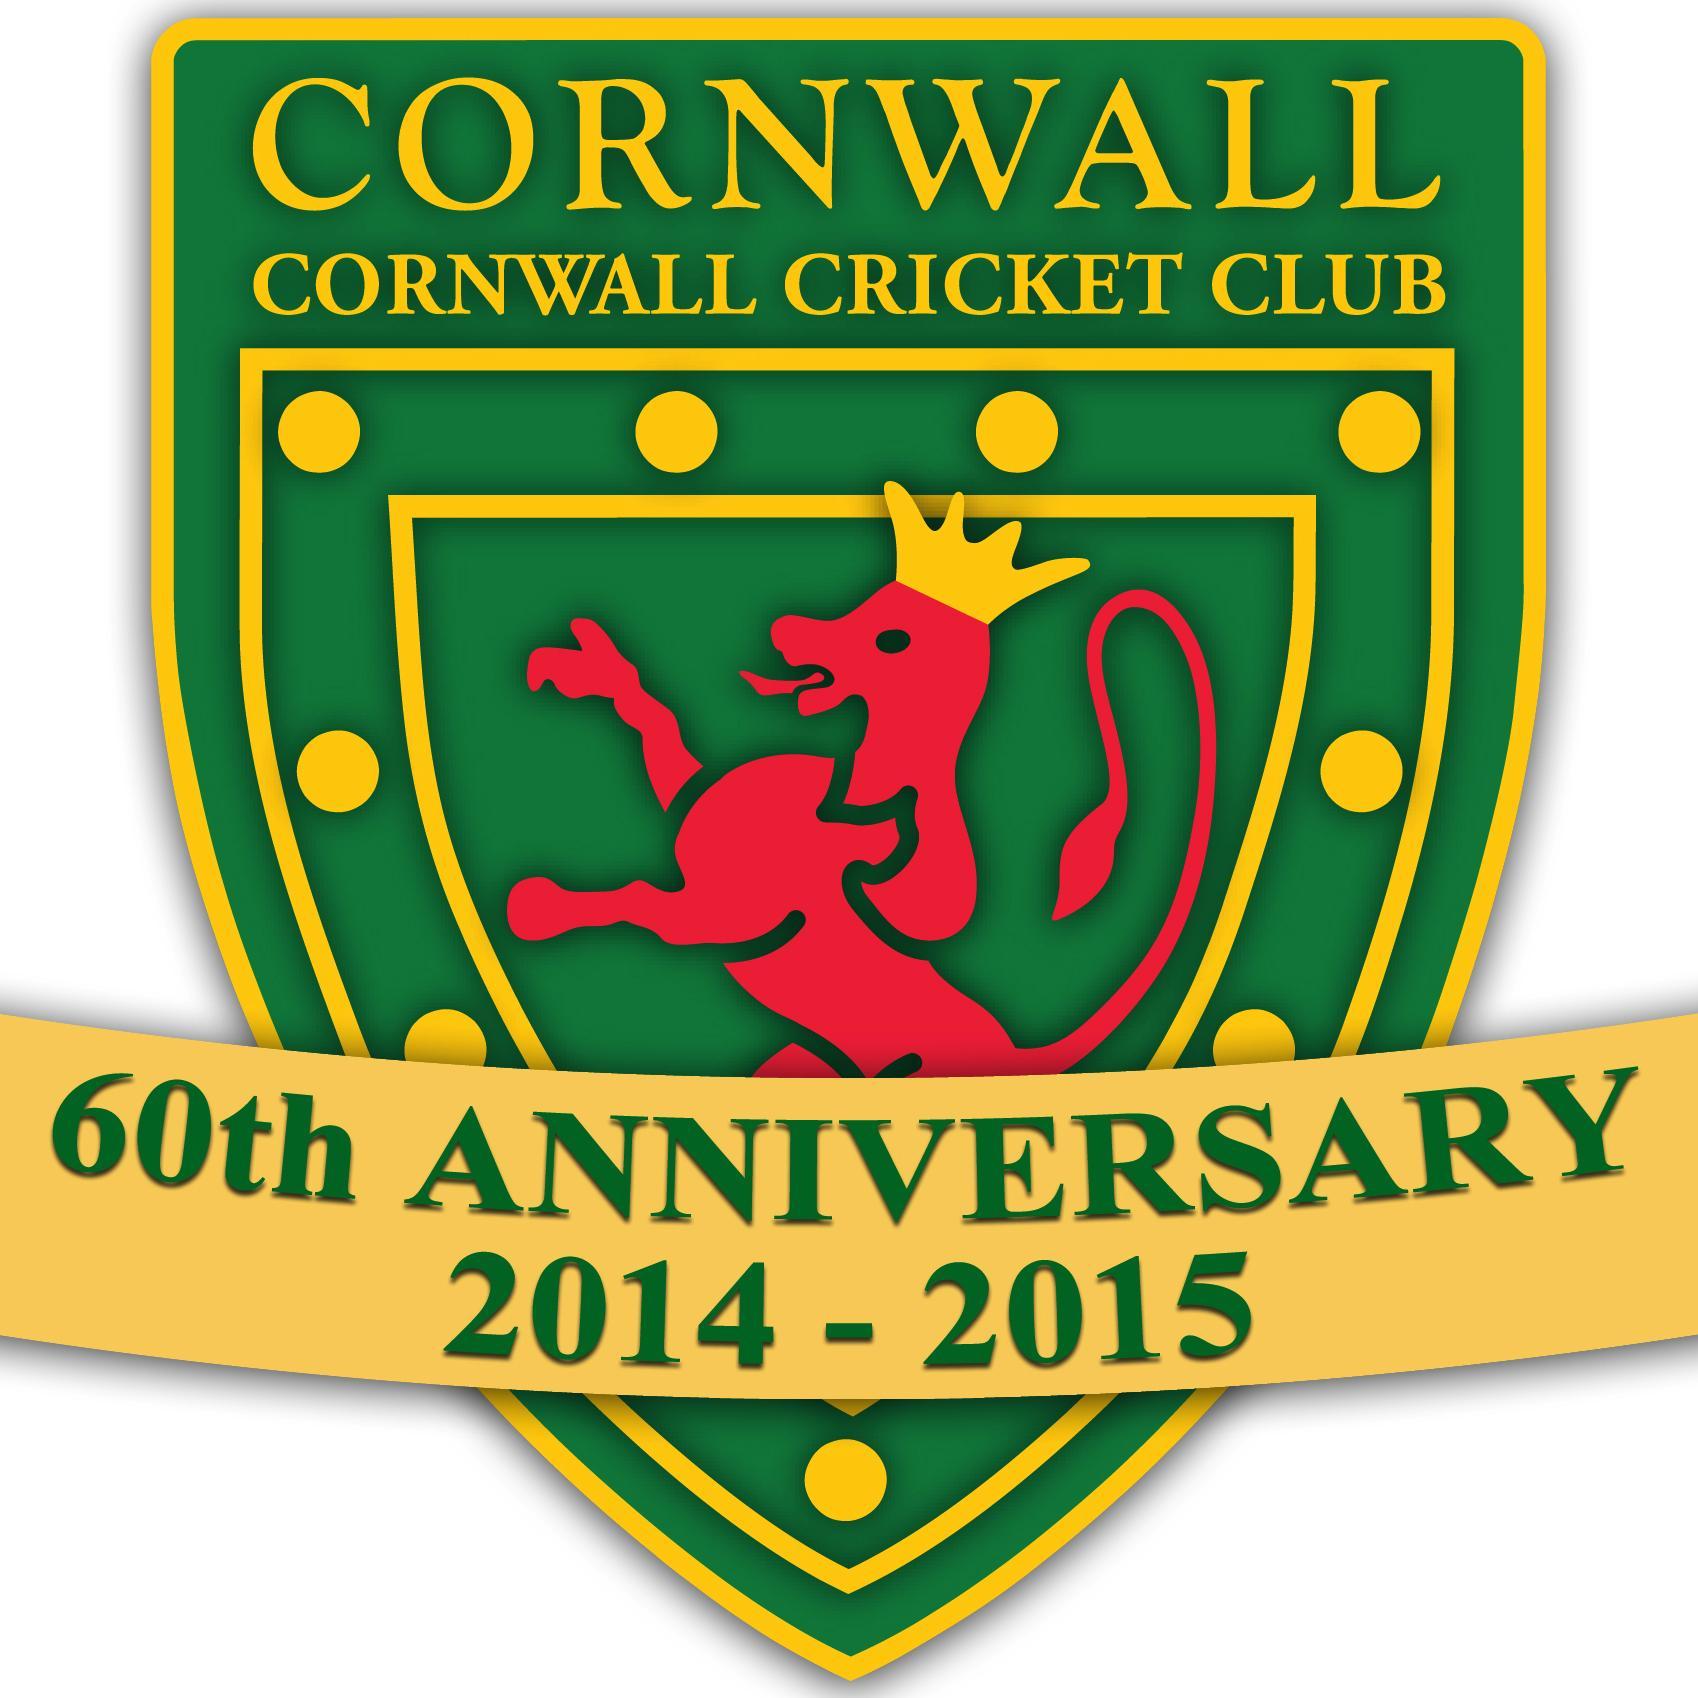 Register to celebrate our 60th at http://t.co/cw1TmieU0U #cornwallturns60